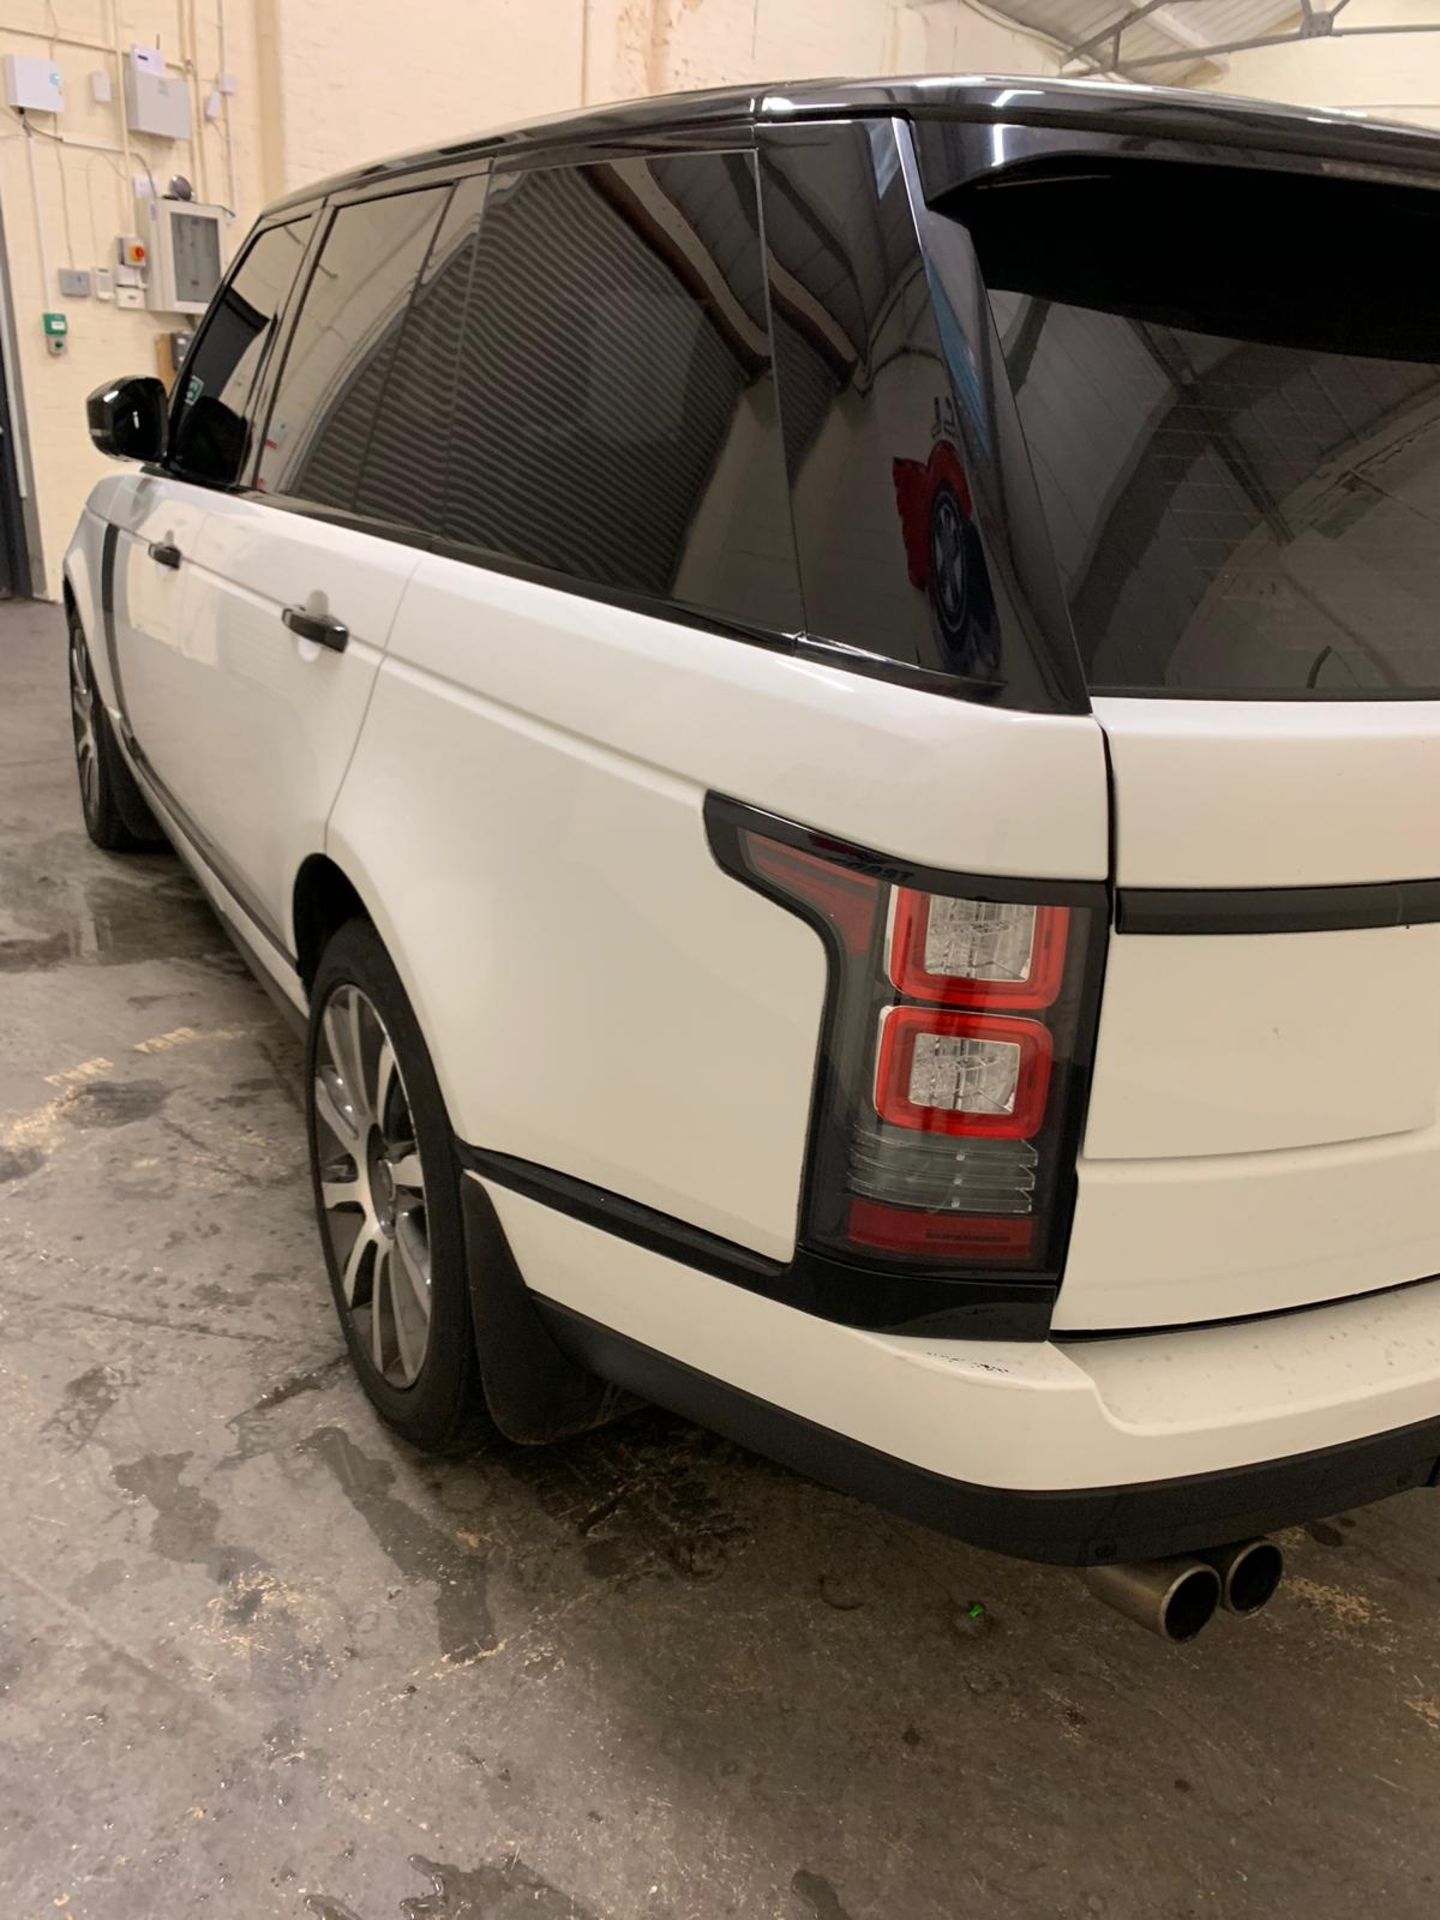 2013 RANGE ROVER VOGUE 5.0 HSE, LEFT HAND DRIVE, 75,000 KM 46,602 MILES- UPGRADED SVR 4 PIPE EXHAUST - Image 4 of 23